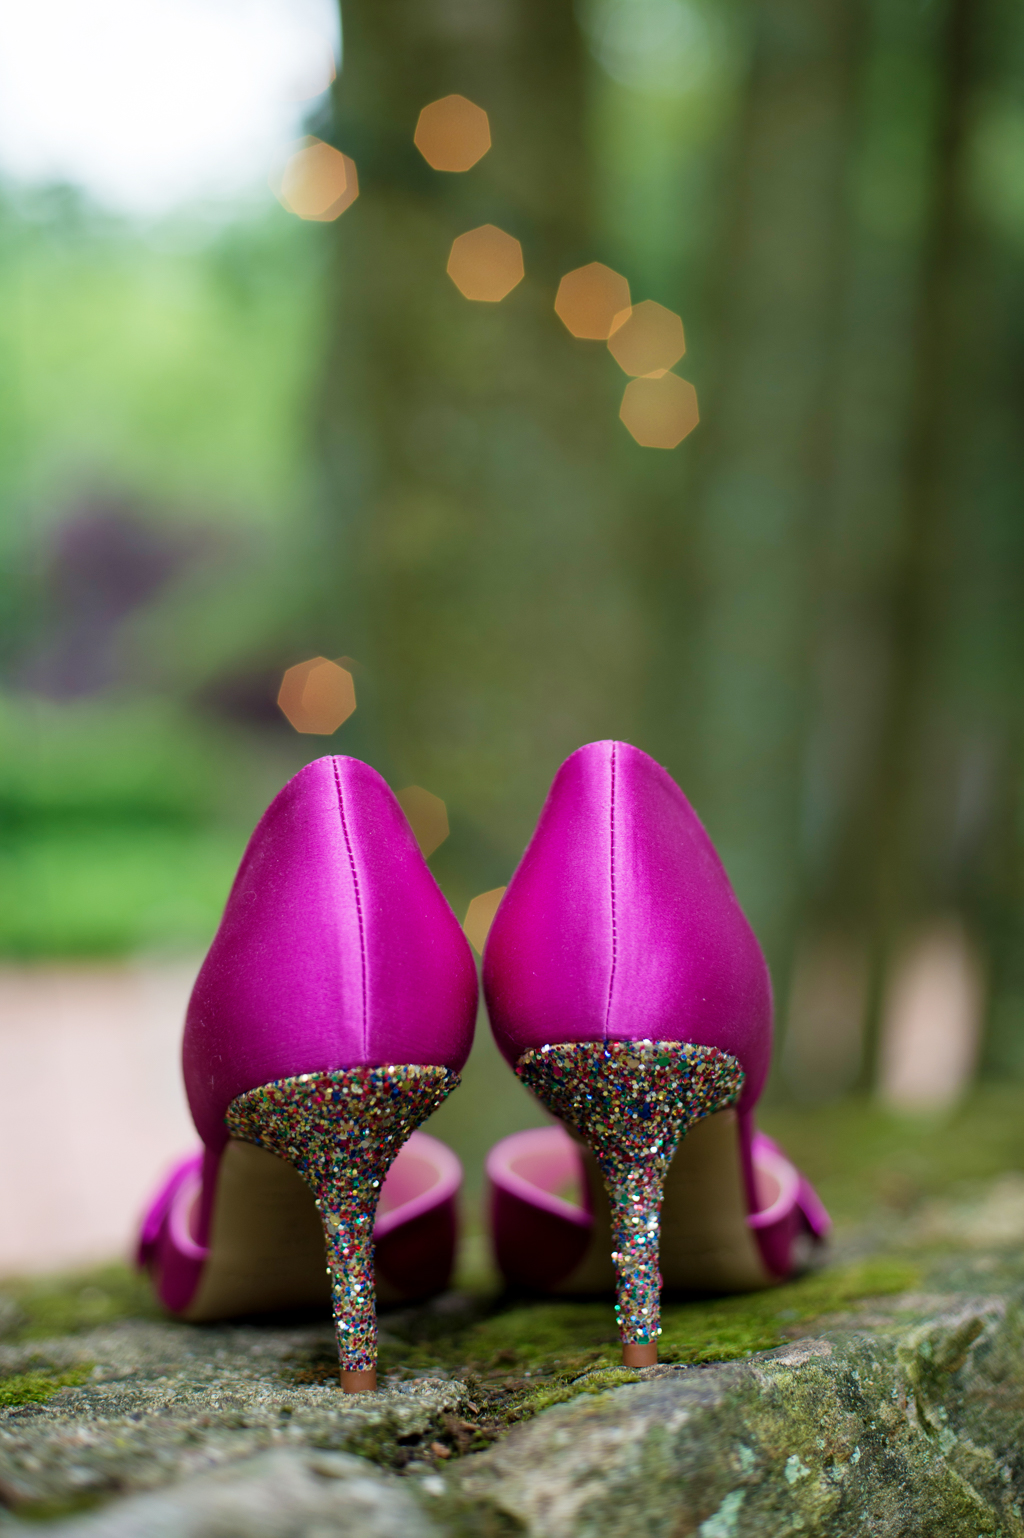 hot pink wedding shoes with colorful glittery heels